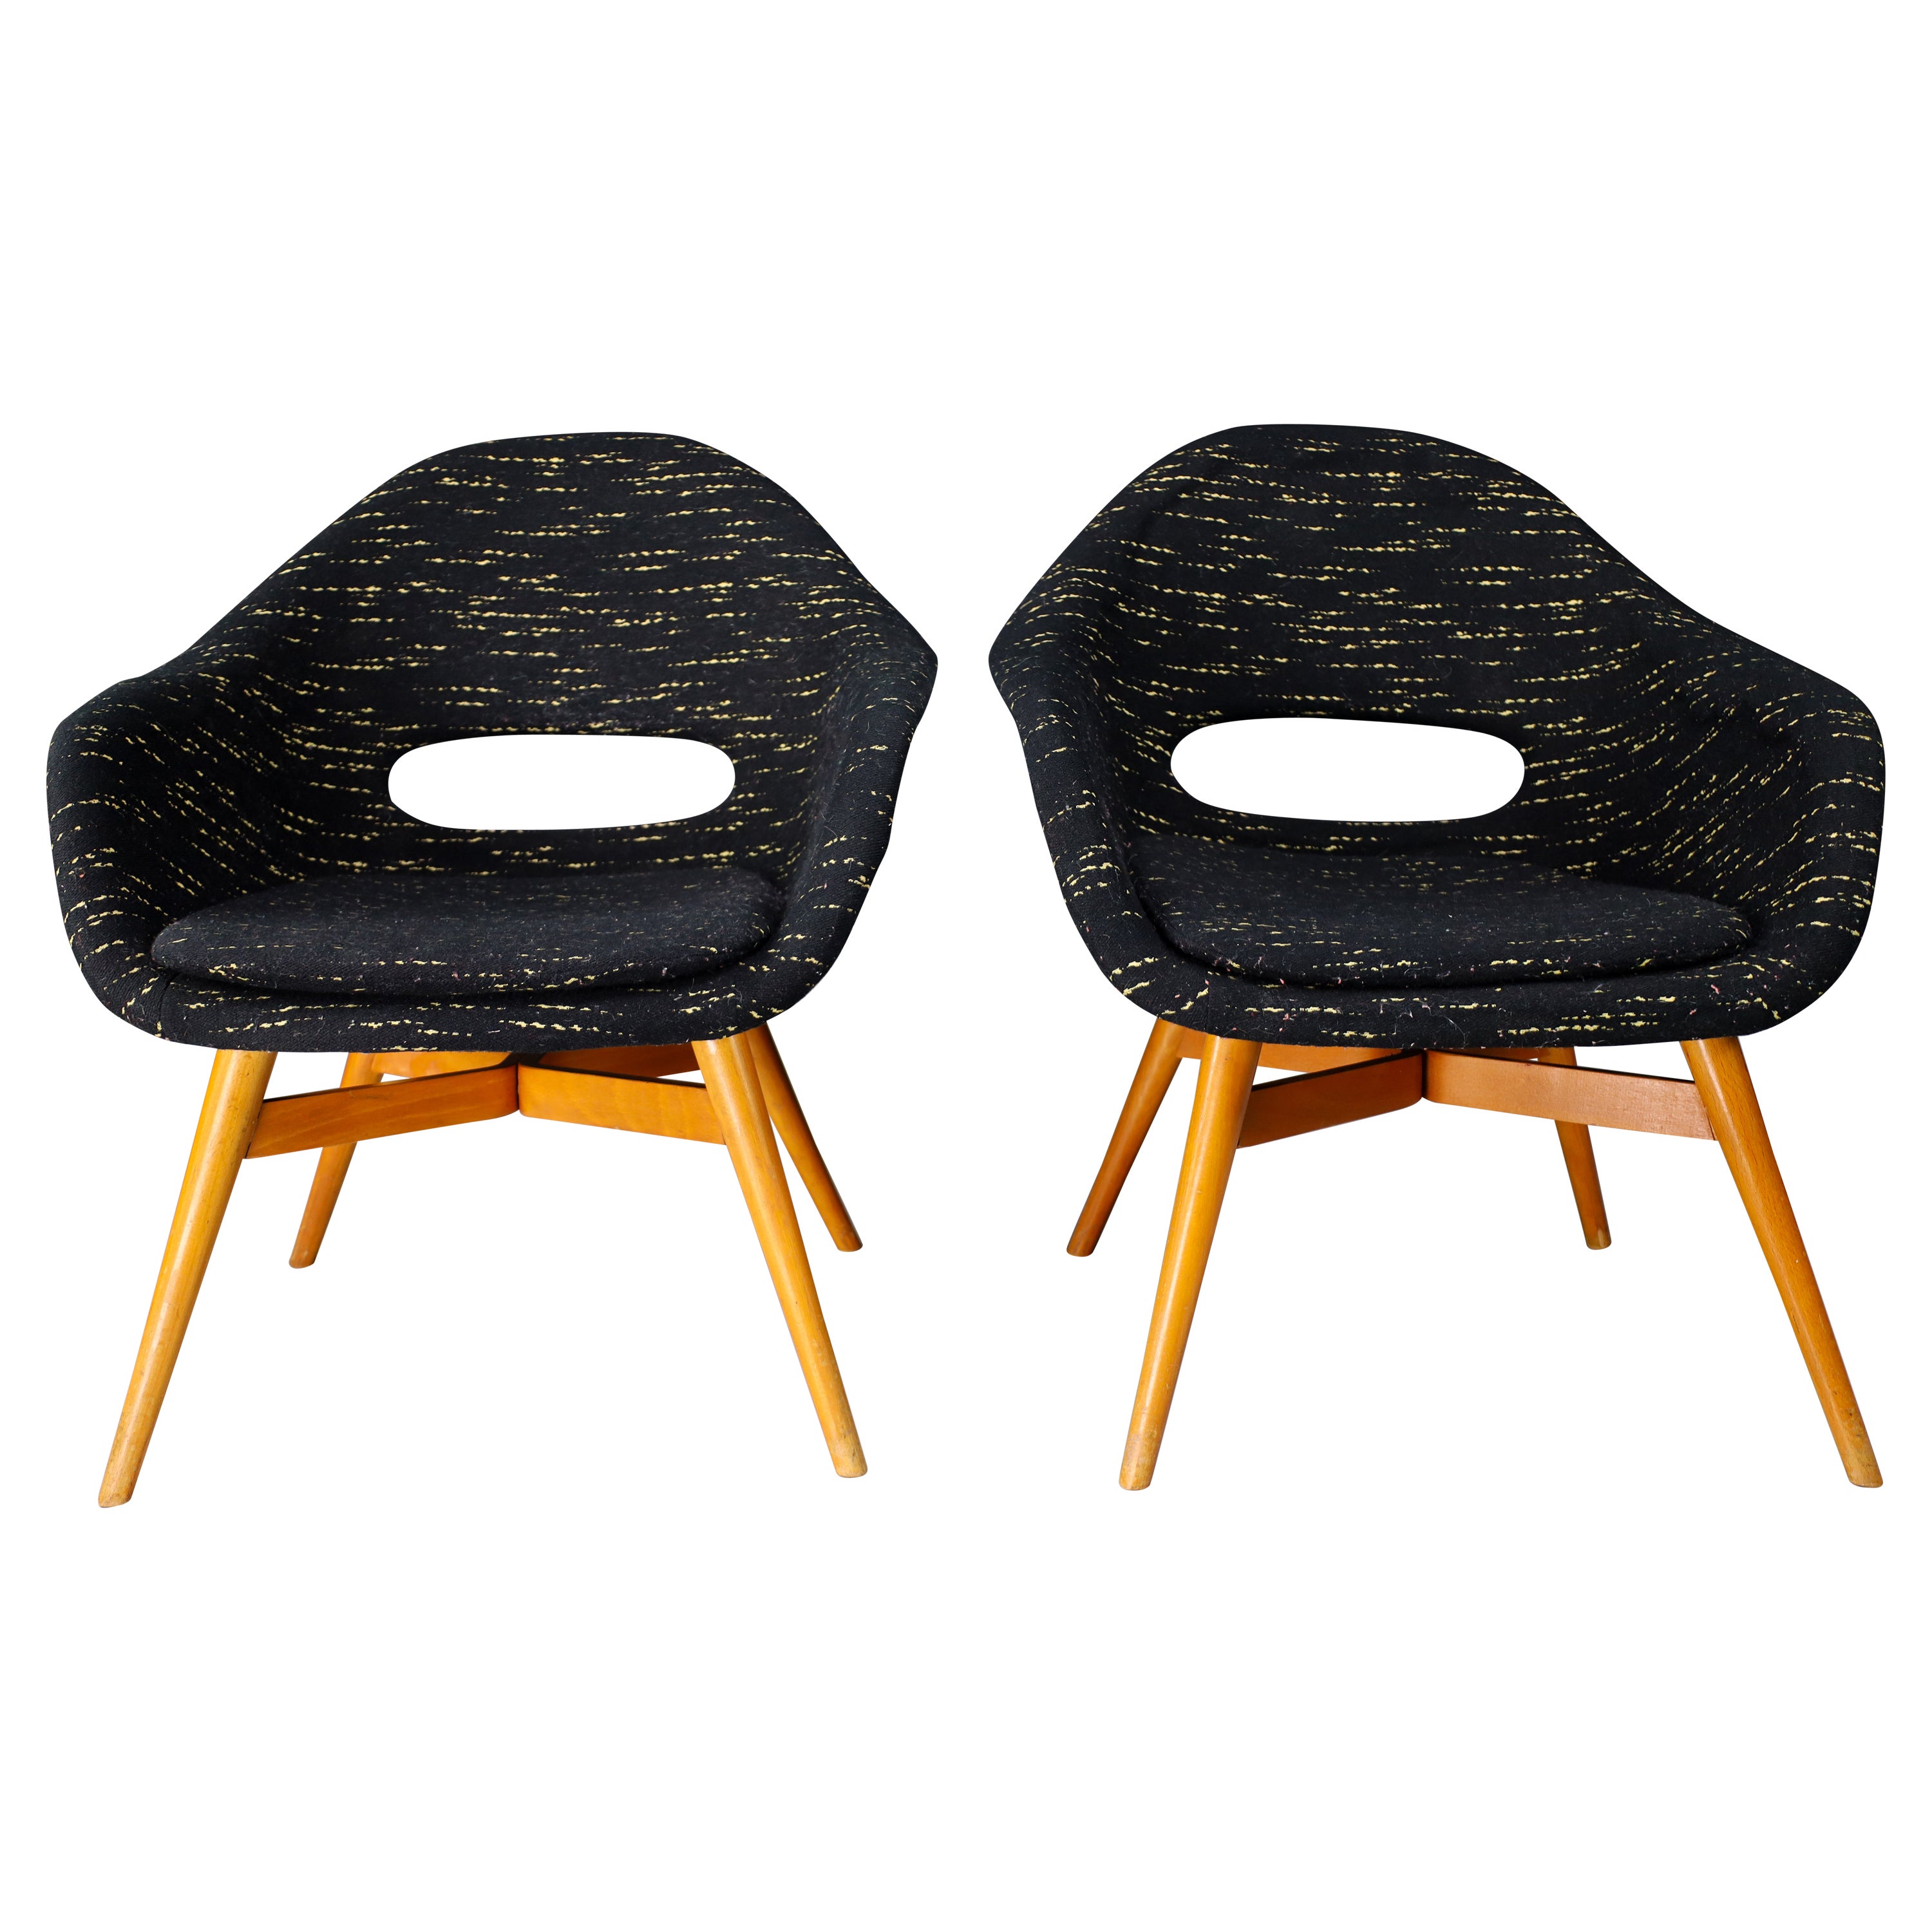 Two Original Easy Chairs by Miroslav Navratil in Original Fabric, circa 1960 For Sale